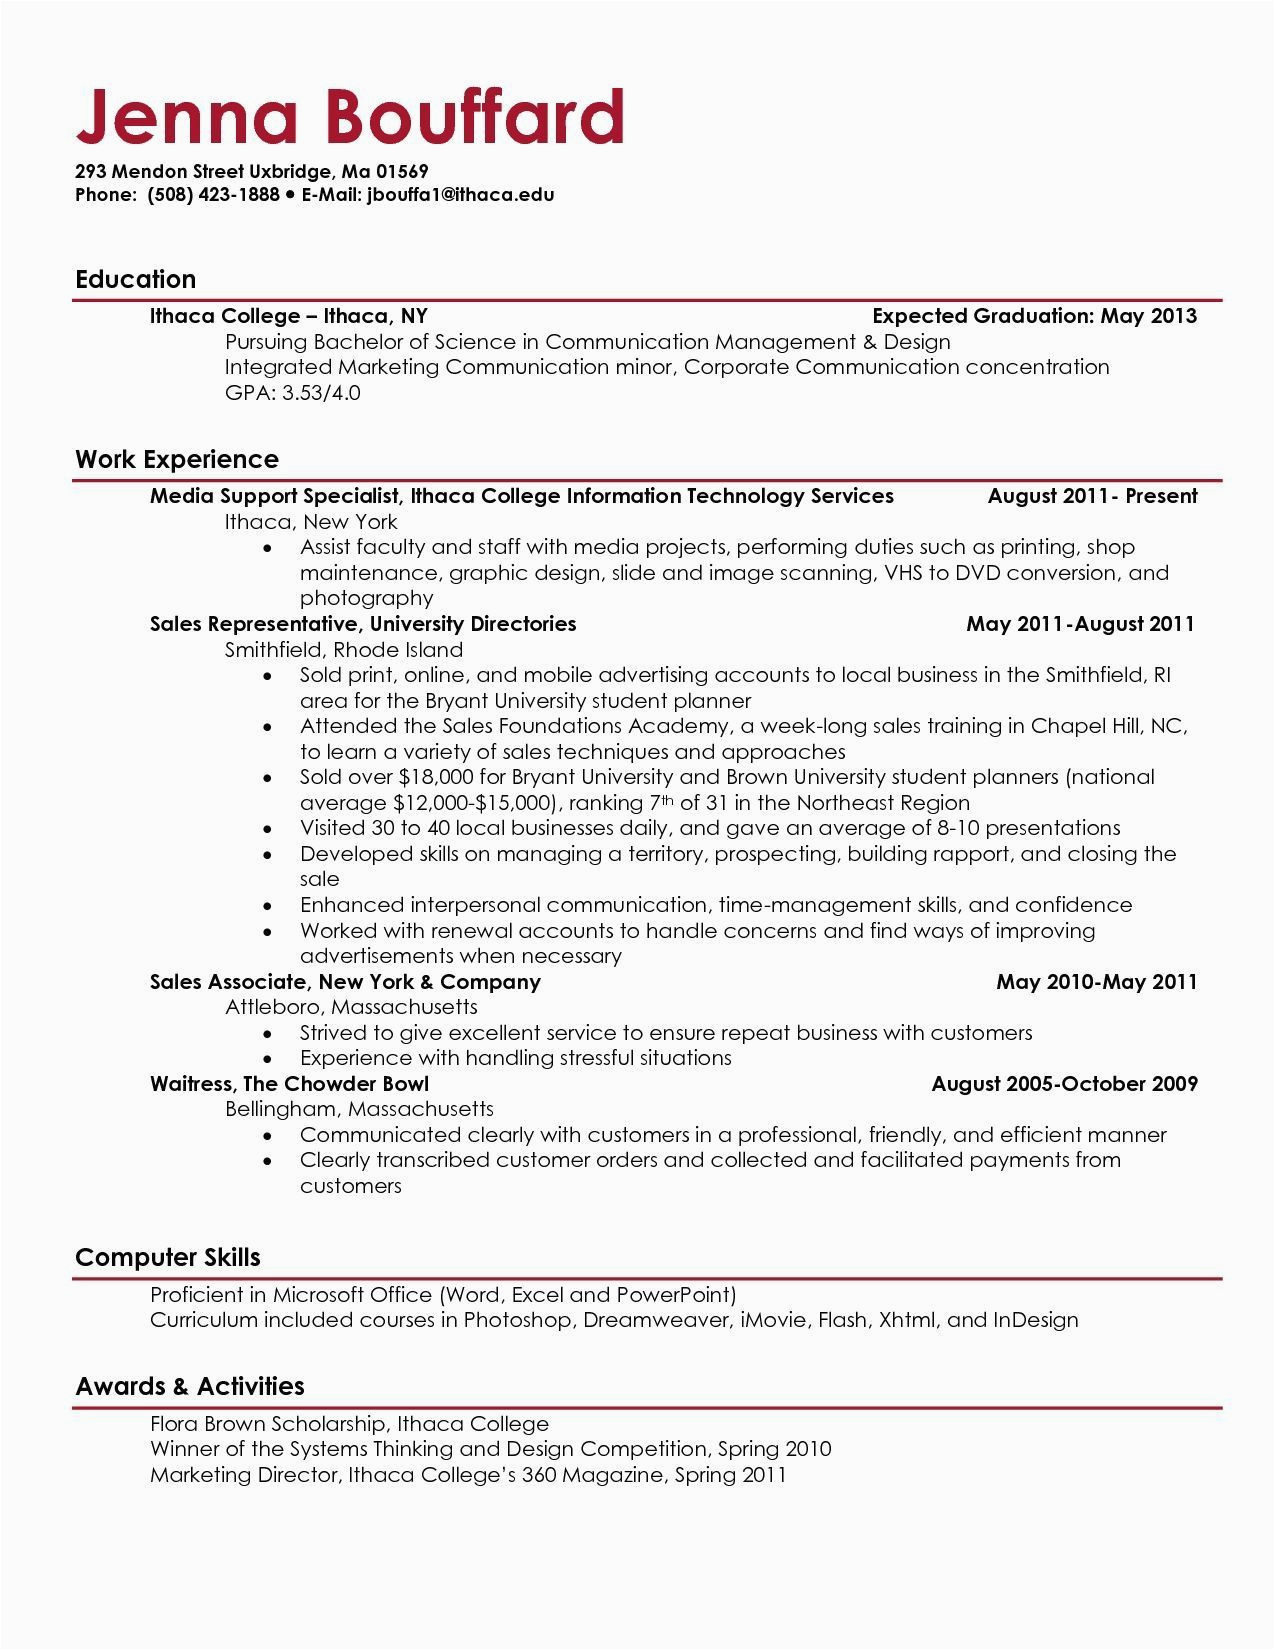 Sample Resume Profile for College Student for College Students In 2020